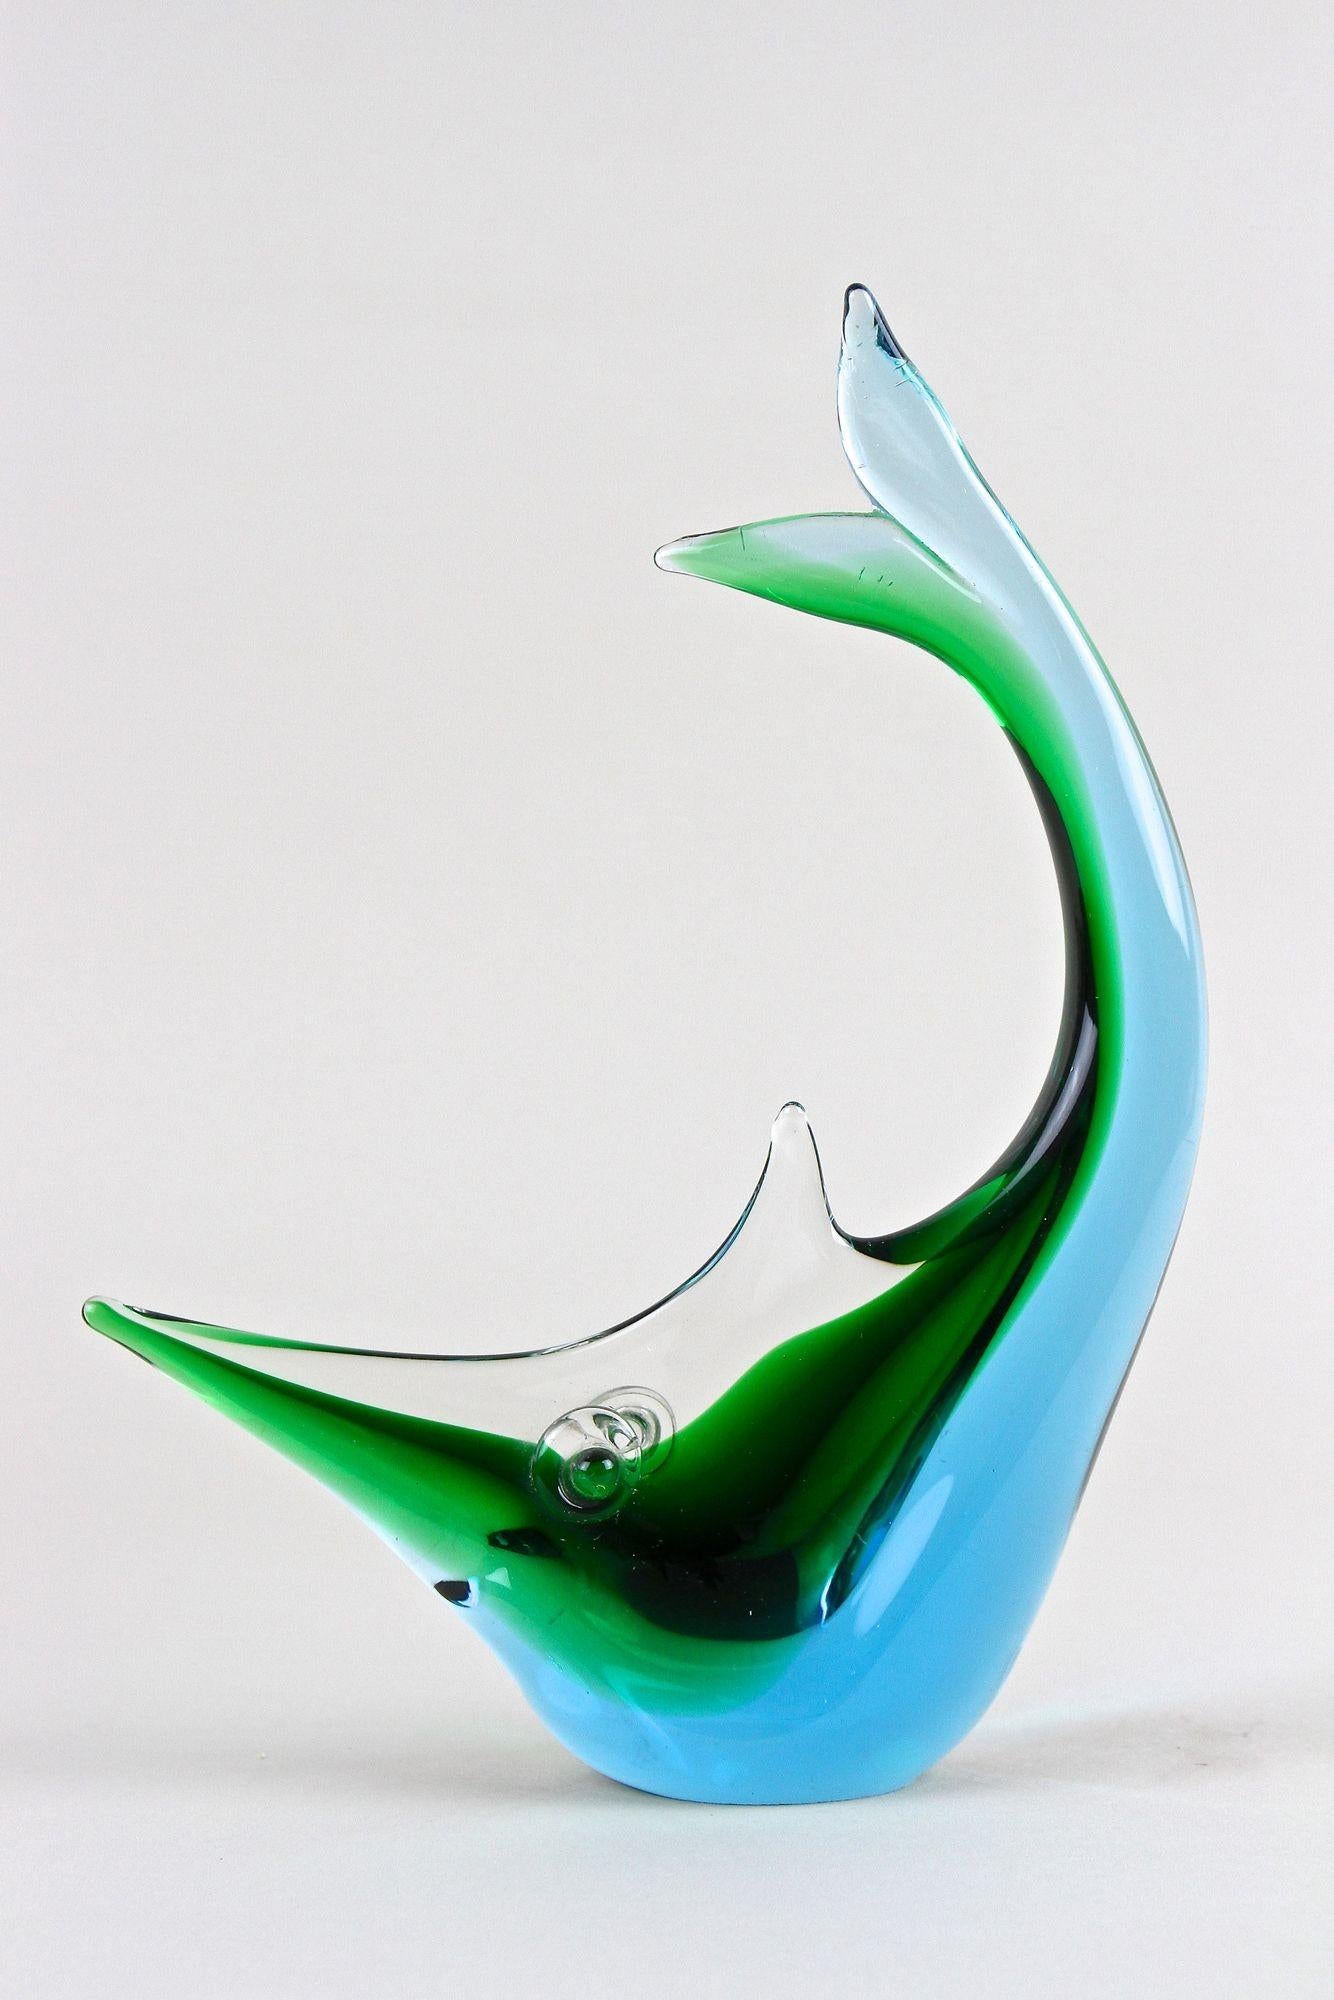 Mid Century Murano Glass Fish In Blue/ Green Tones , Glass Art - Italy ca. 1970 For Sale 3